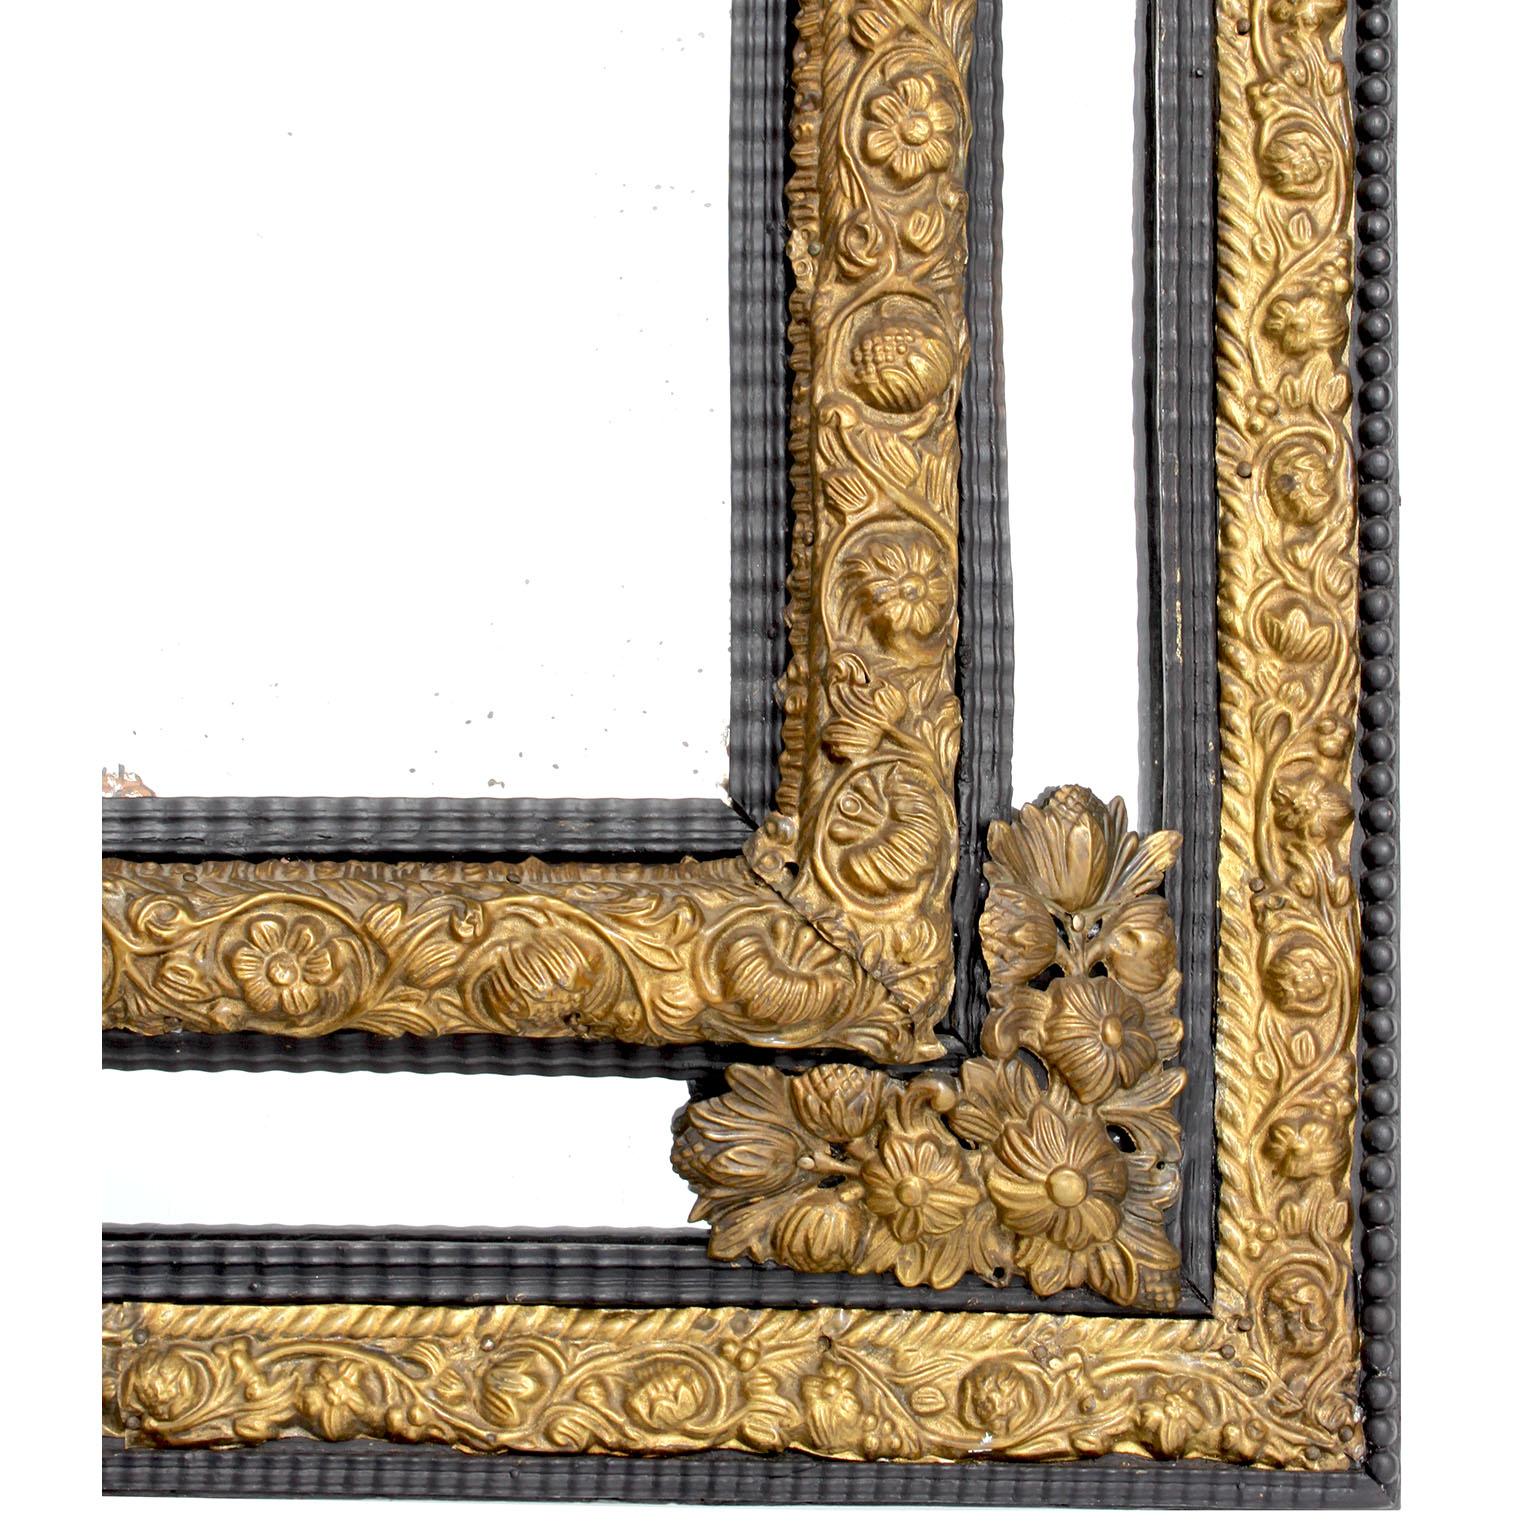 A French 19th Century Baroque Style Hammered Gilt-Brass Repoussé Mirror Frame For Sale 2